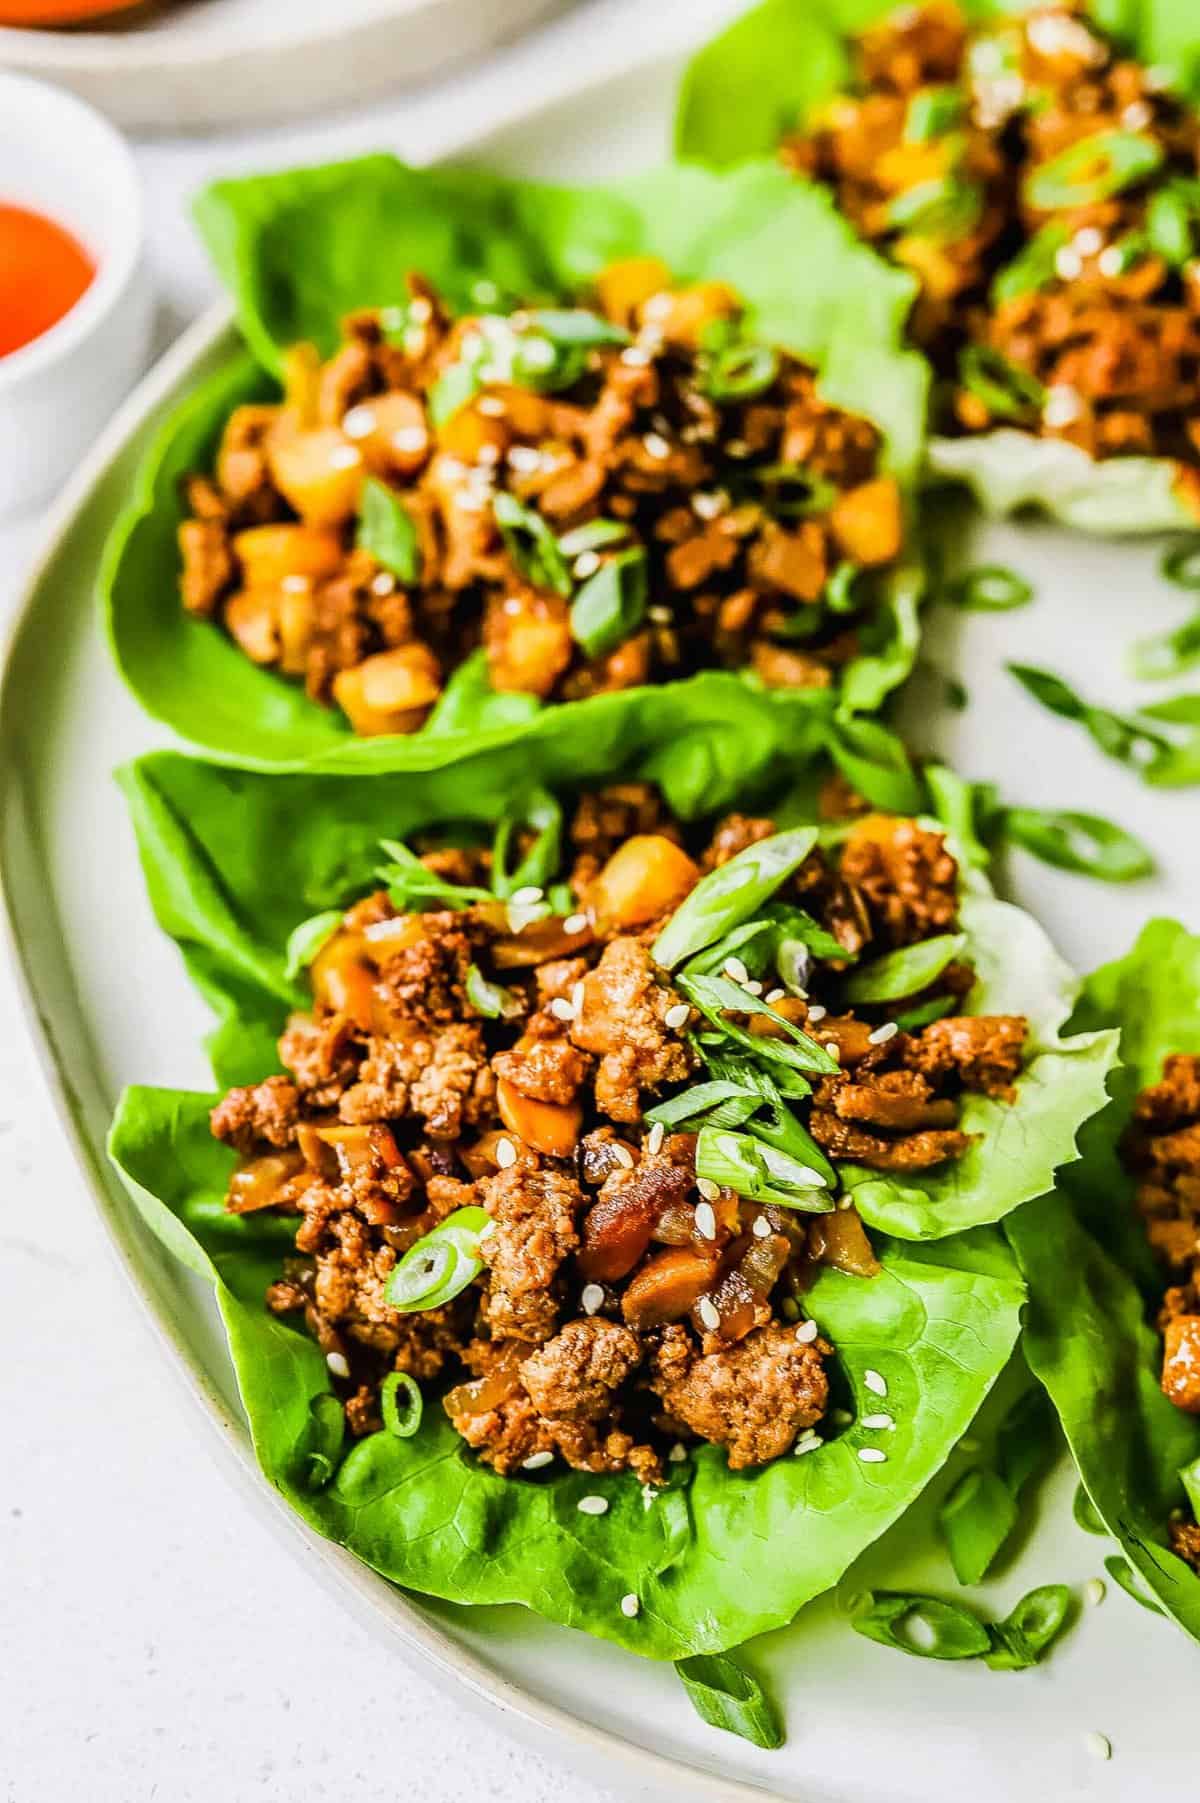 Ground chicken and mushrooms wrapped in a lettuce leaf.